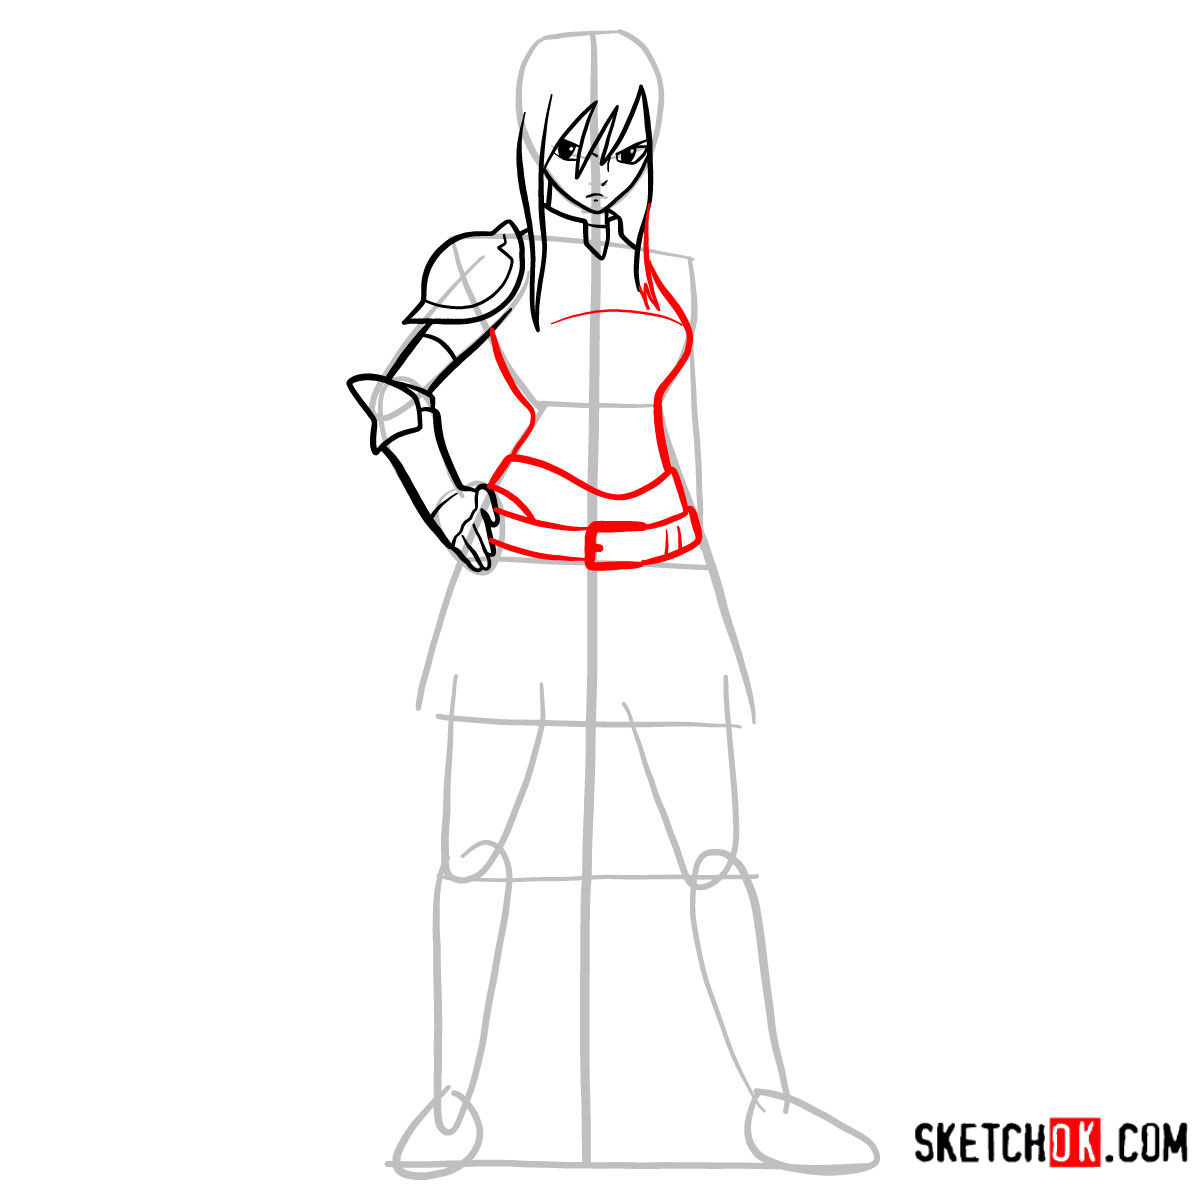 15 steps drawing tutorial of Erza Scarlet (fairy tail) - step 08